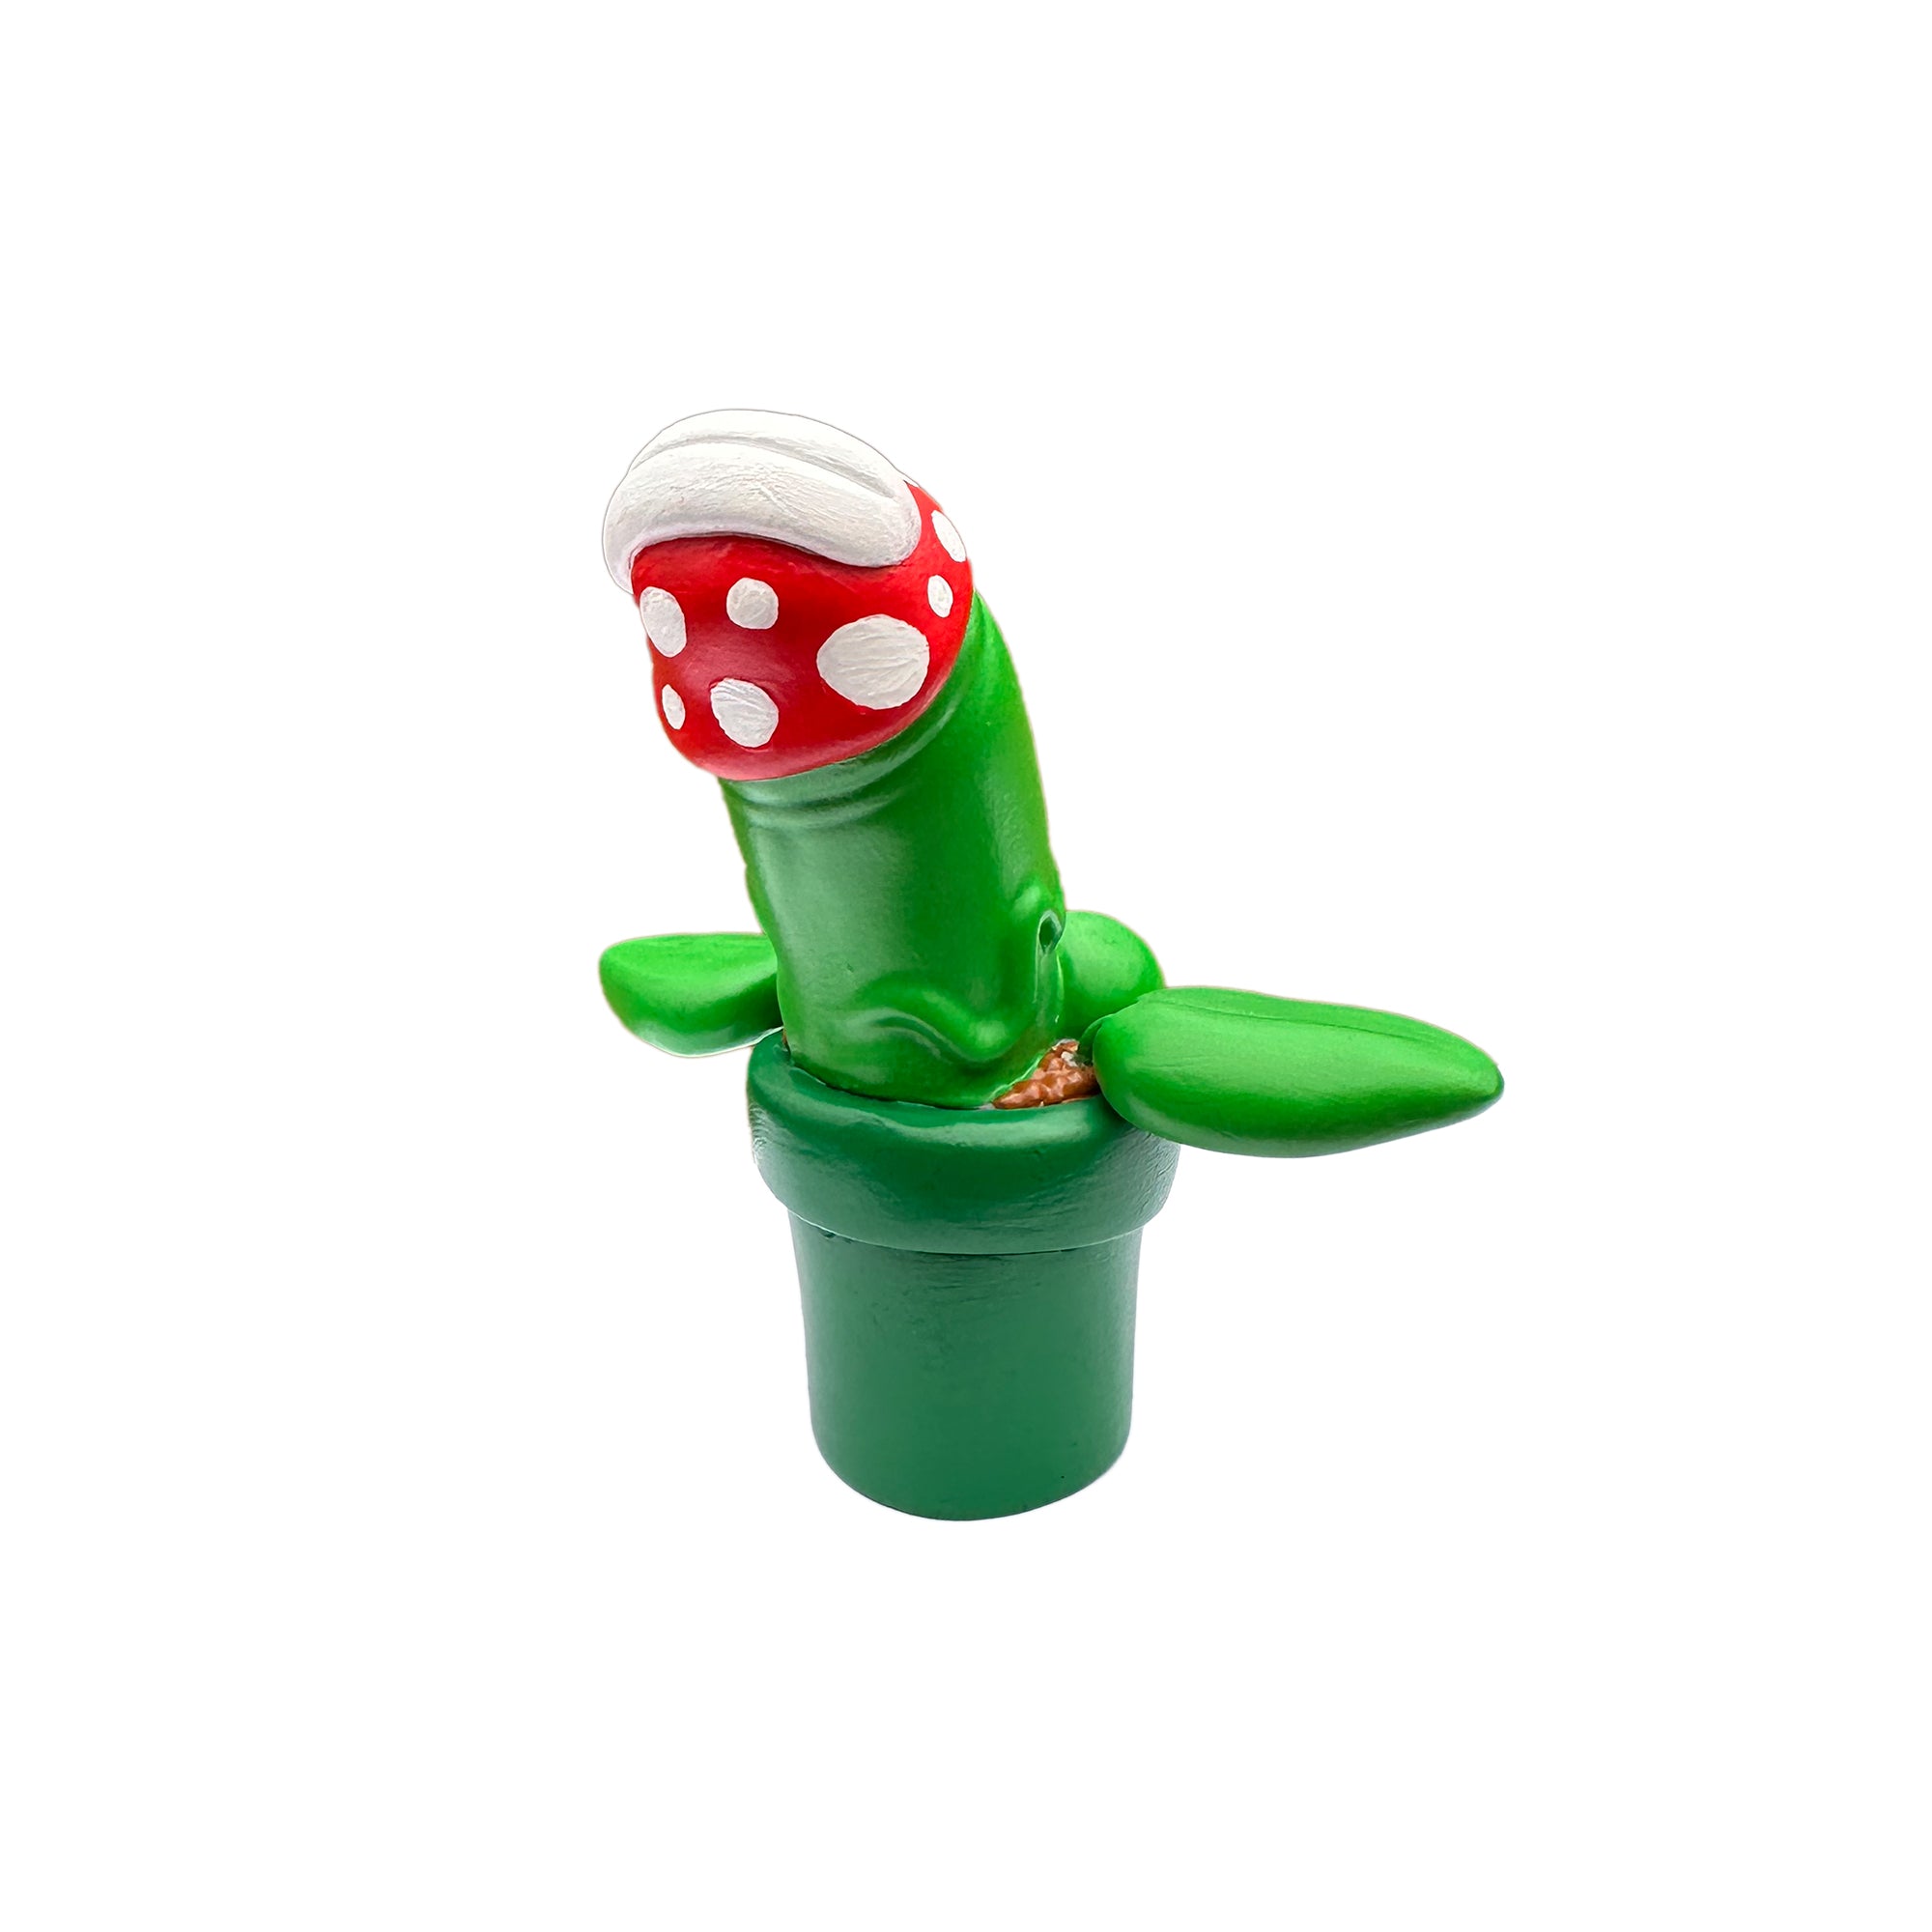 A green plant with a red hat and mushroom toy, close-up details, part of Simon Says Macy & Friends - Piranha Pecker by Prime.